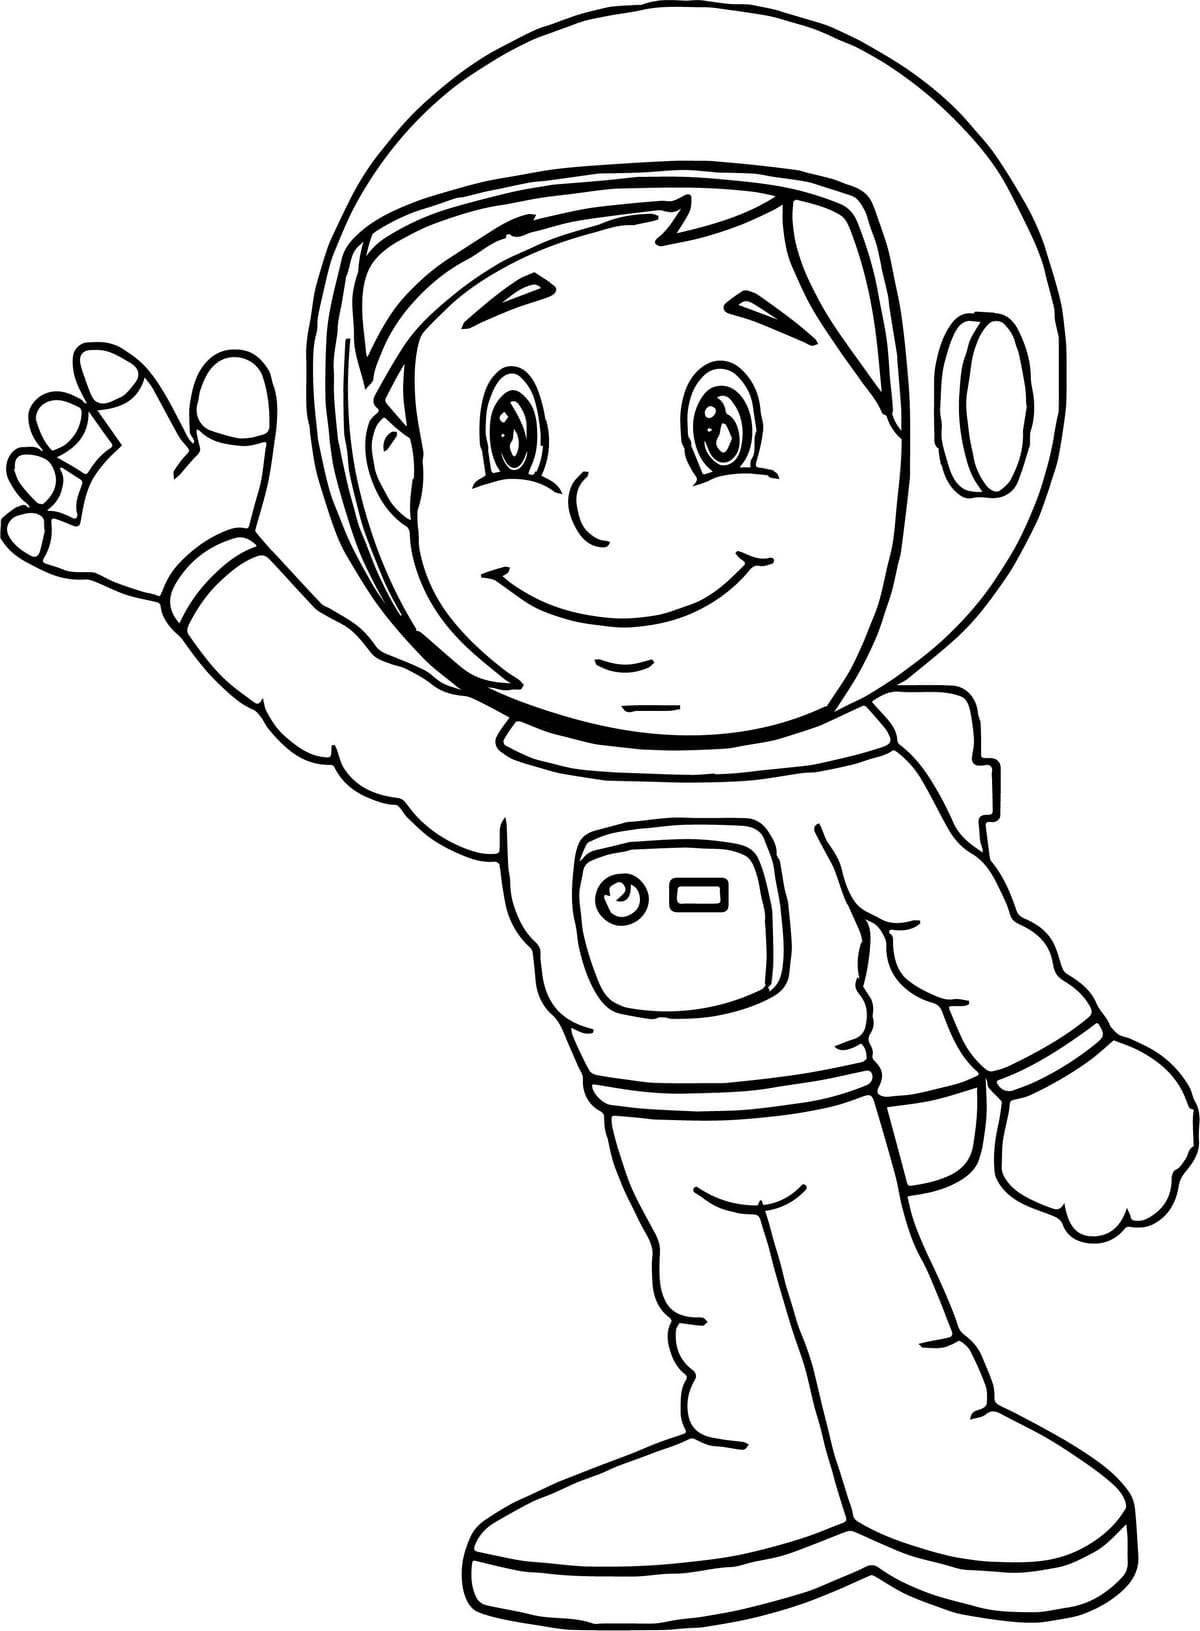 Sparkly astronaut coloring page